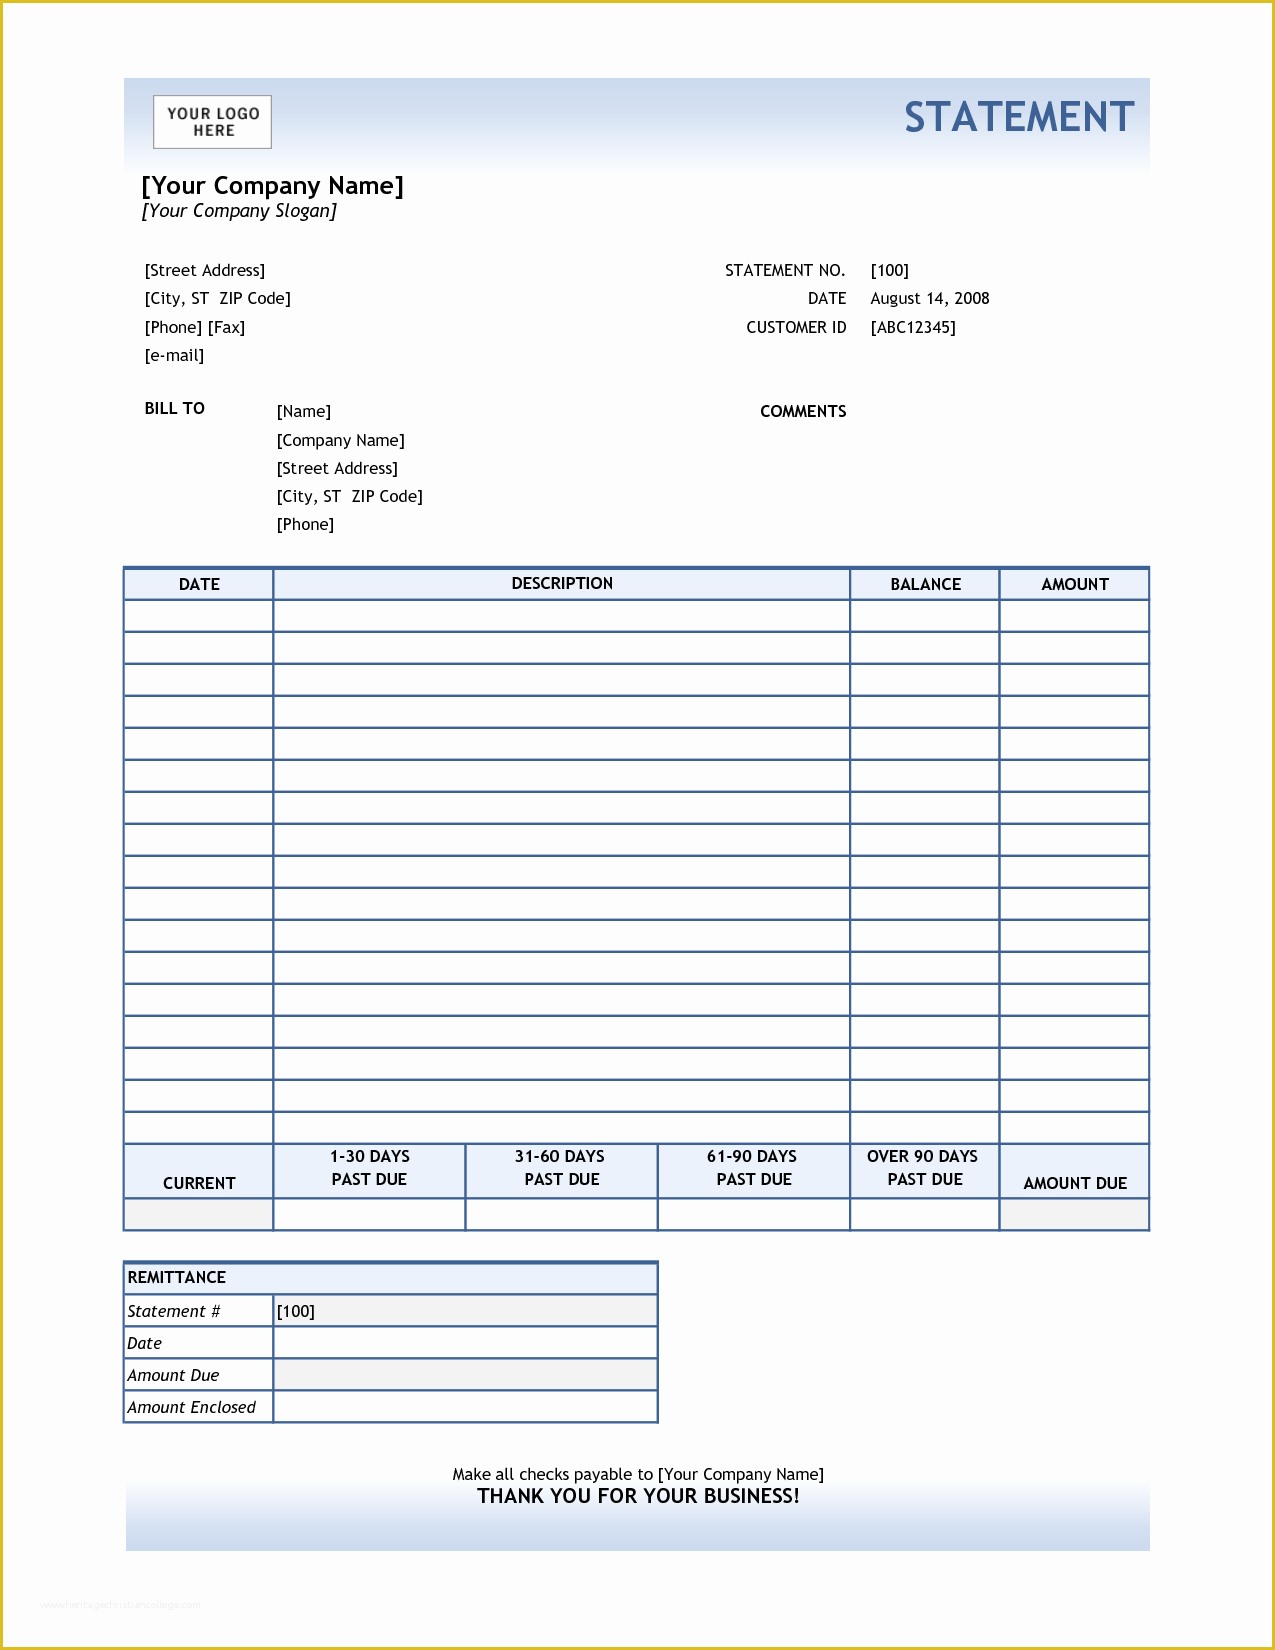 Free Printable Billing Statement Template Of Editable Billing Statement Template with Blue Tables